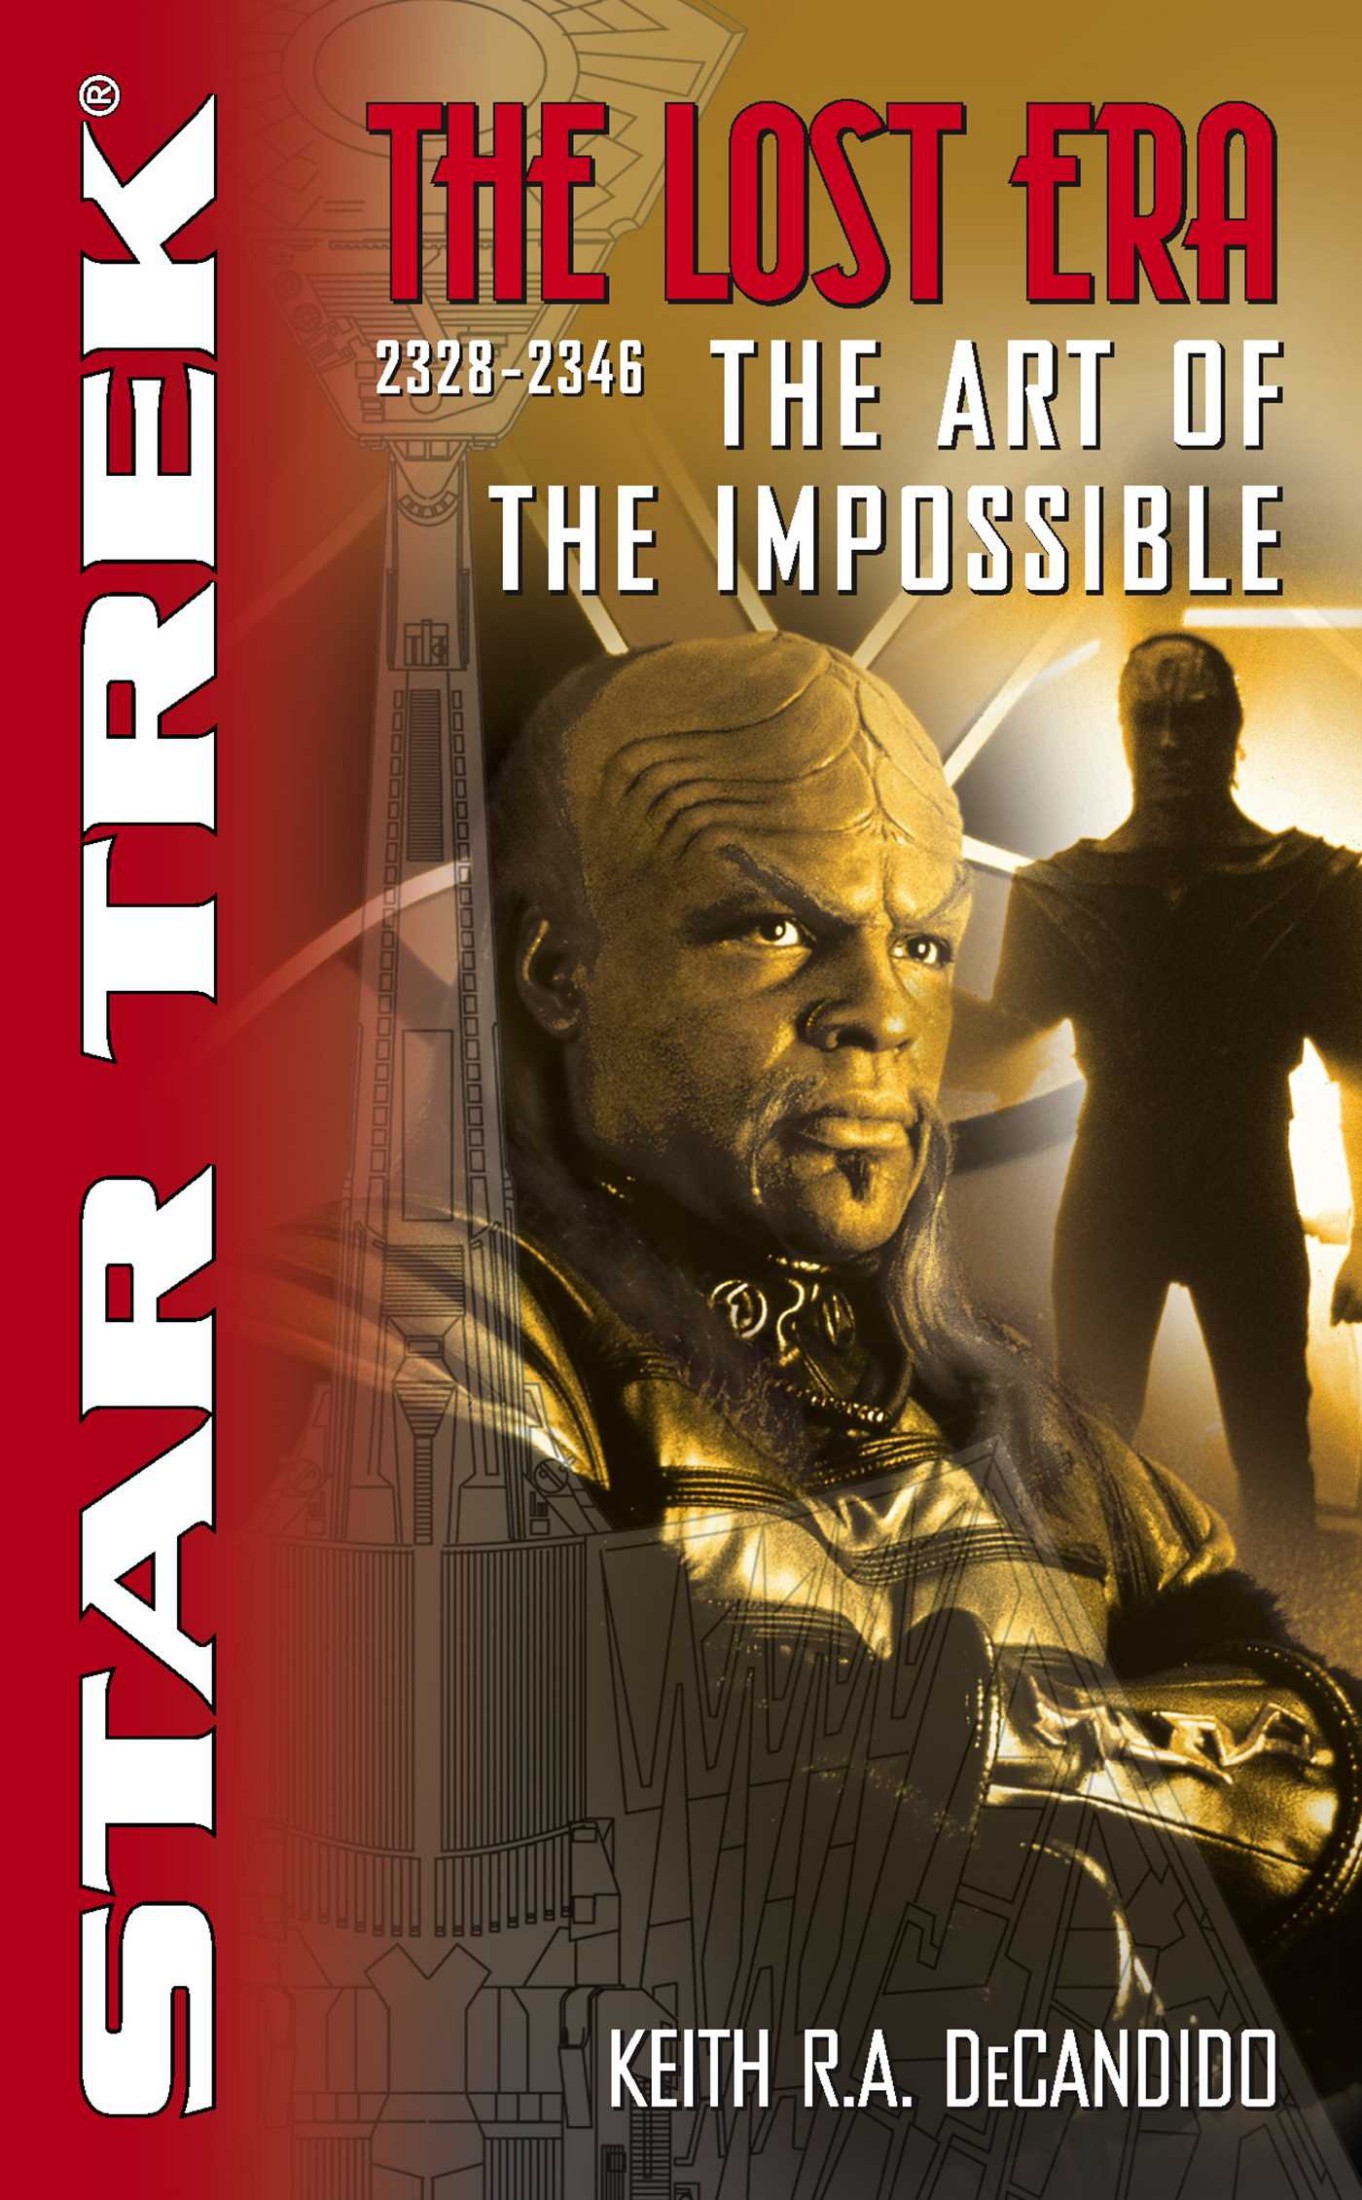 2328-2346: The Art of the Impossible (Sep 2003)